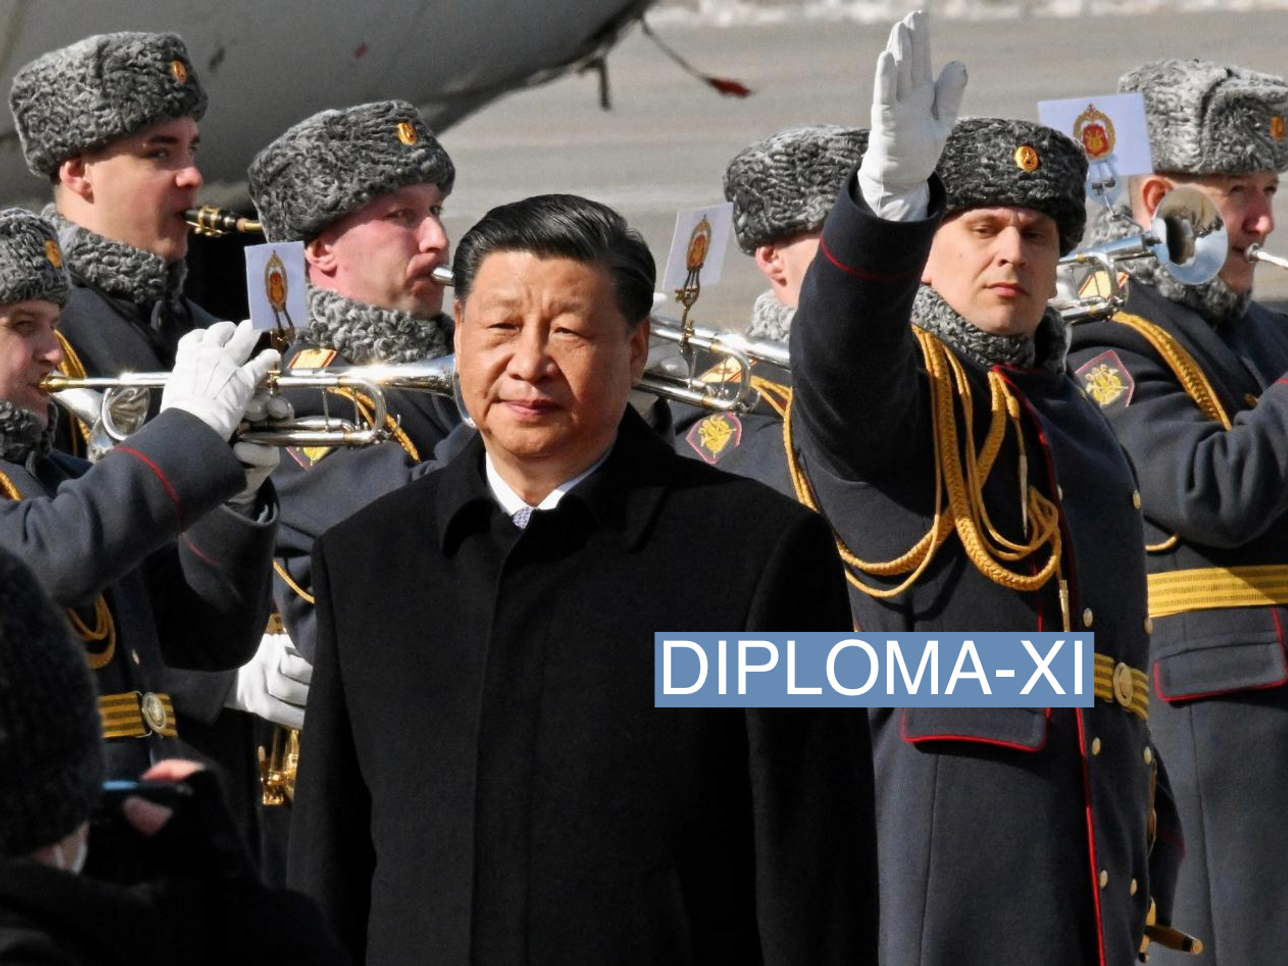 Chinese leader Xi Jinping walks past honour guards and members of a military band during a welcoming ceremony upon his arrival at an airport in Moscow, Russia, March 20, 2023. Kommersant Photo/Anatoliy Zhdanov via REUTERS